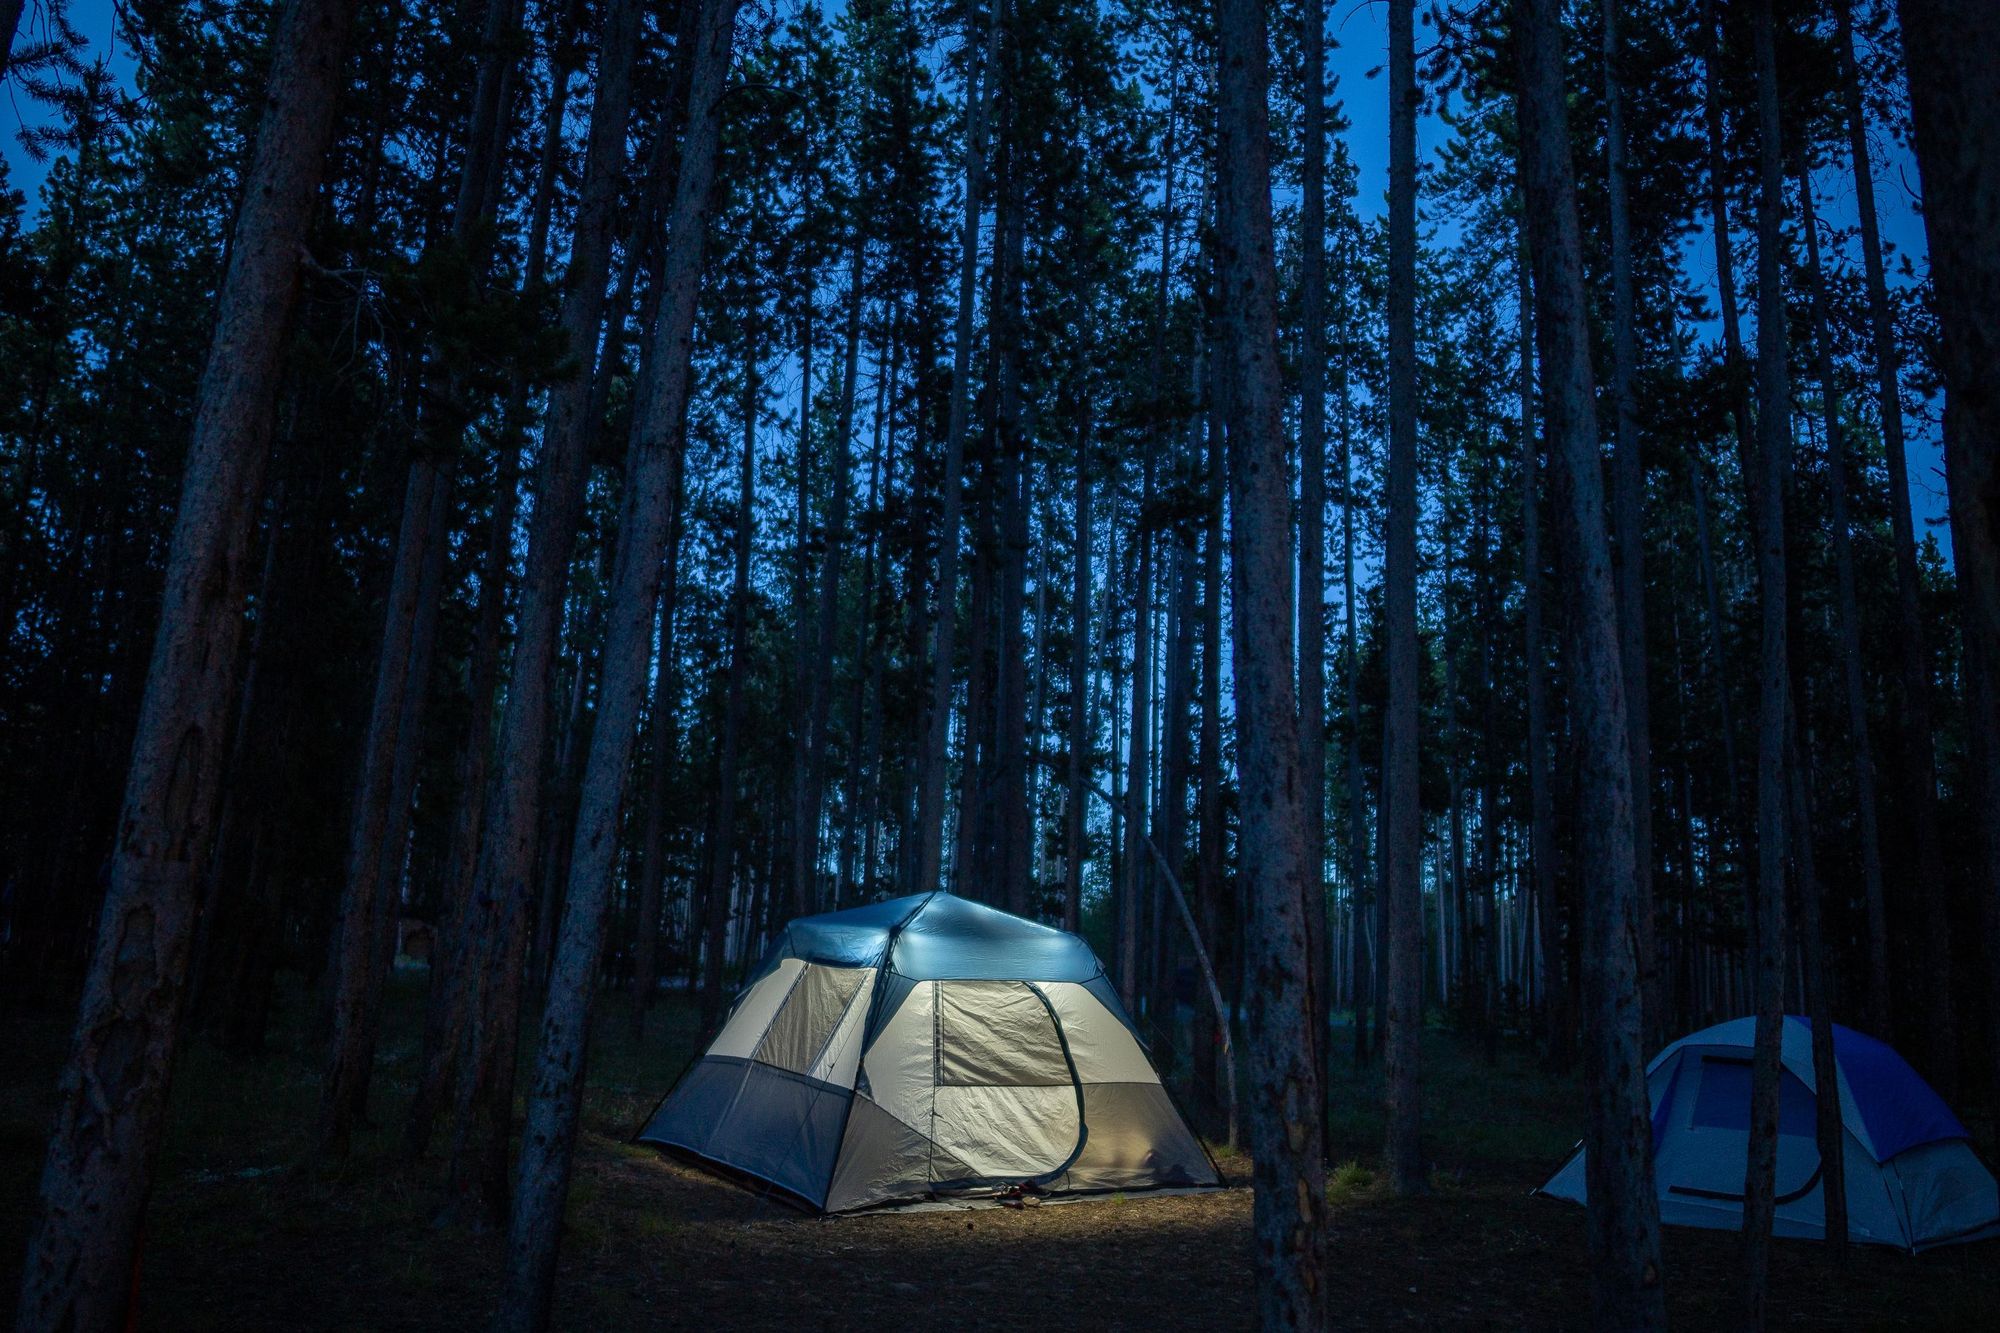 Camping lights come on in a tent in Yellowstone, as night falls on the park. Photo: Getty